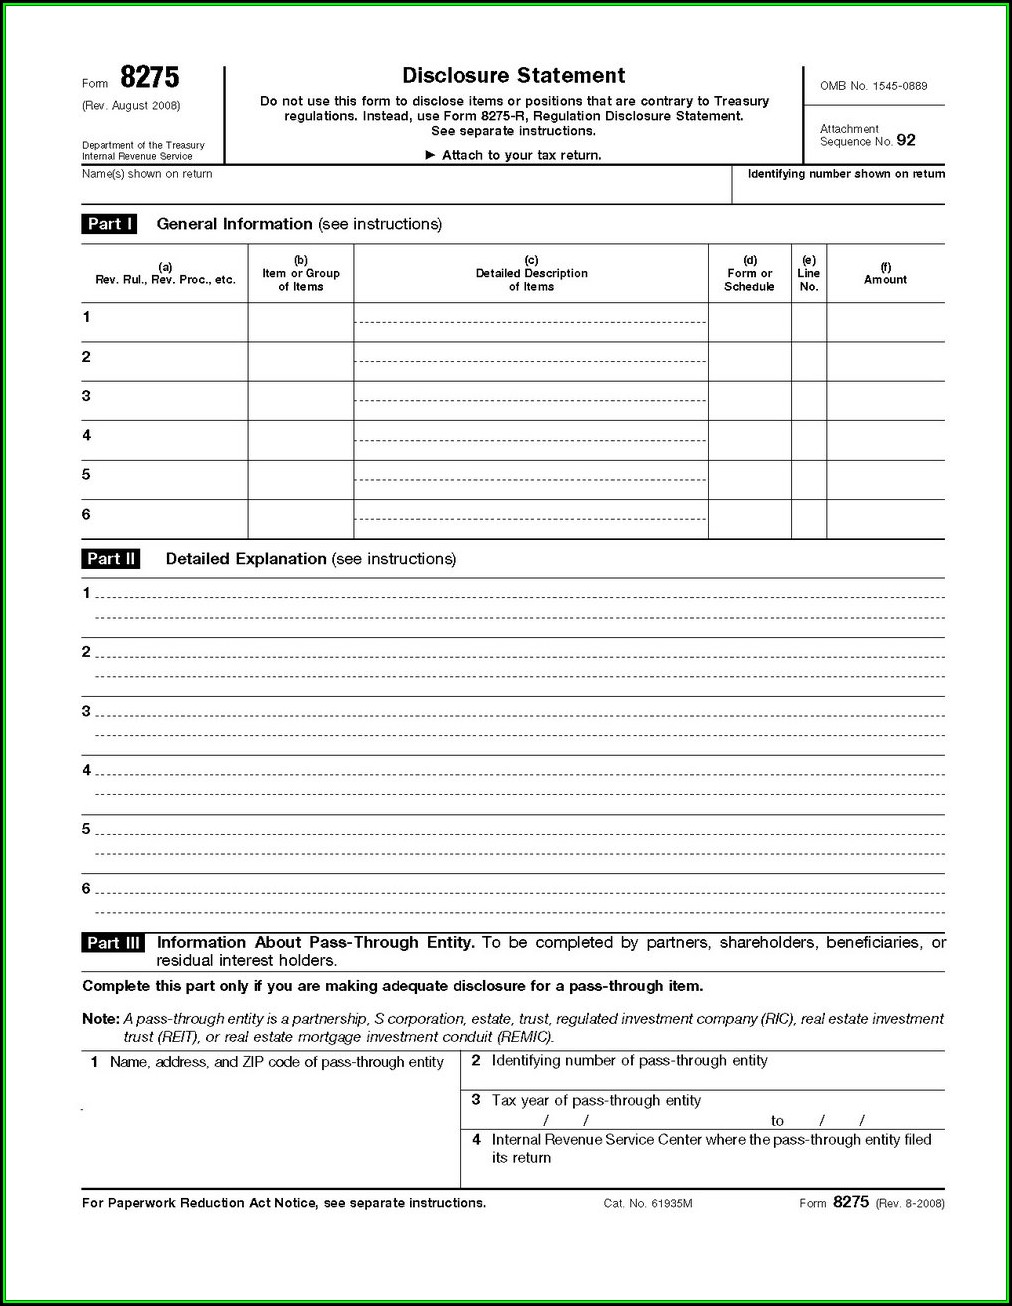 2014 Form 1040a Tax Table